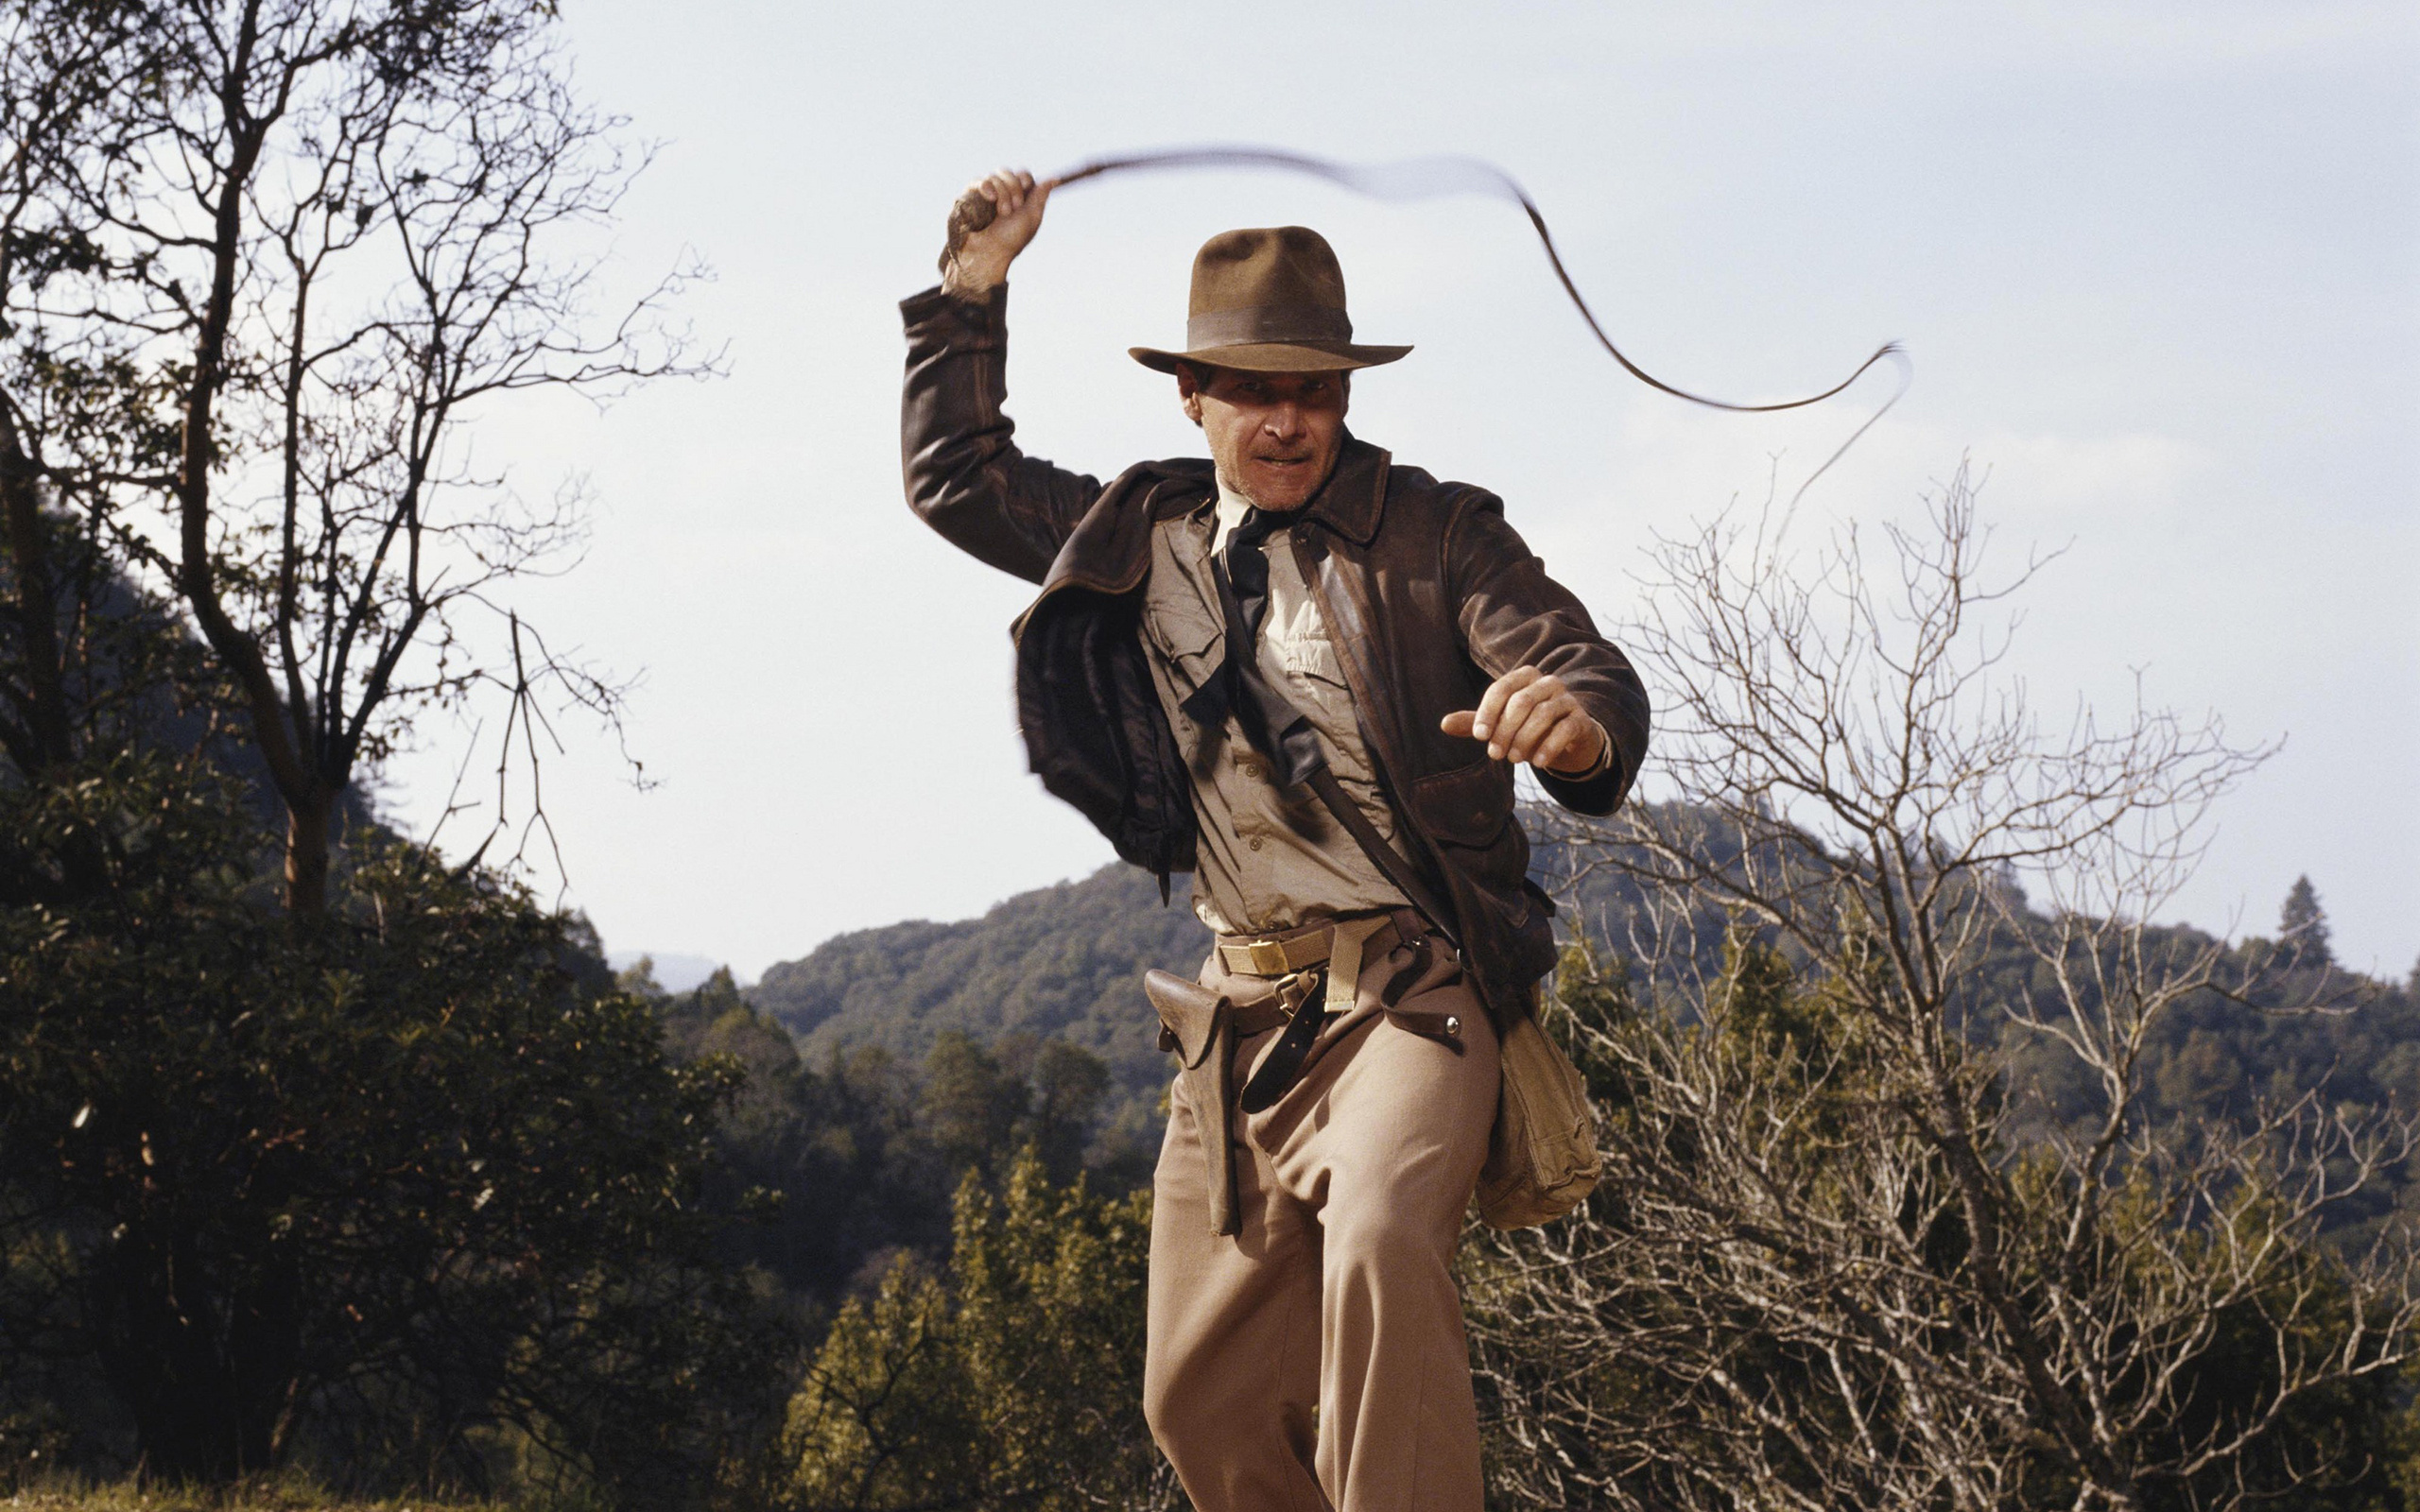 Harrison Ford (Indiana Jones): Character designer Jim Steranko provided Jones with his iconic flight jacket, fedora, and bullwhip. 2560x1600 HD Background.